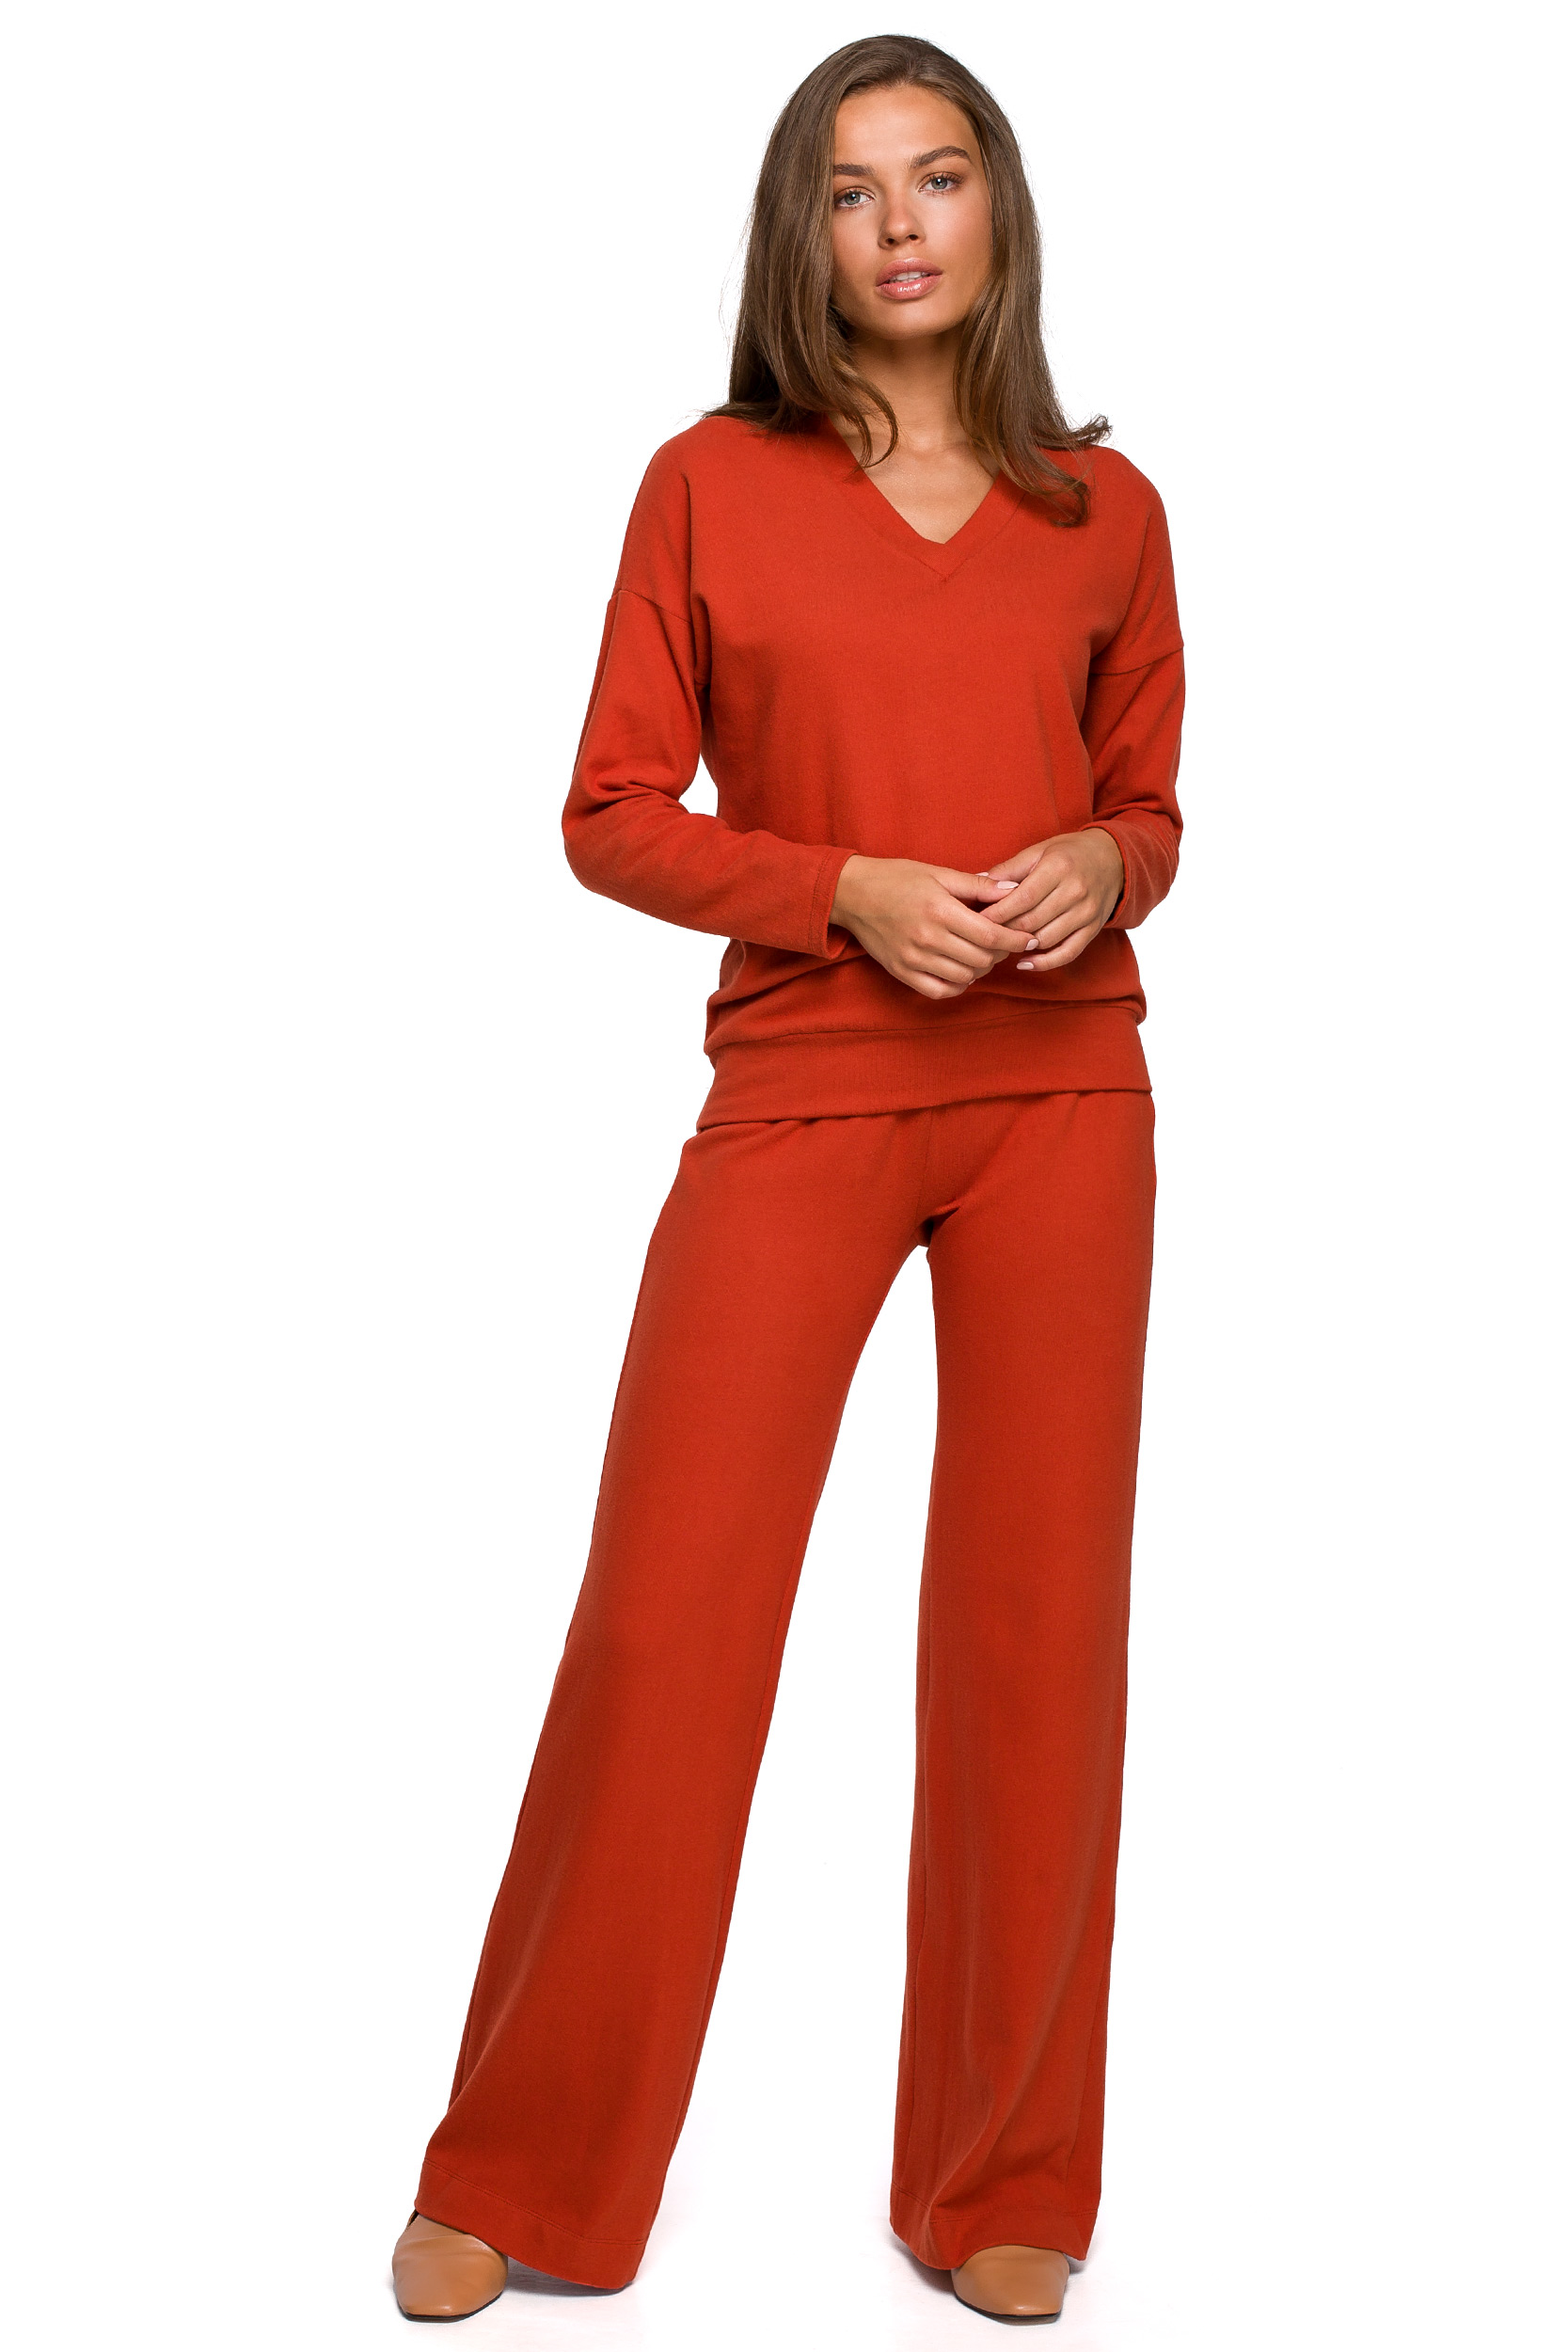 Stylove Woman's Trousers S249